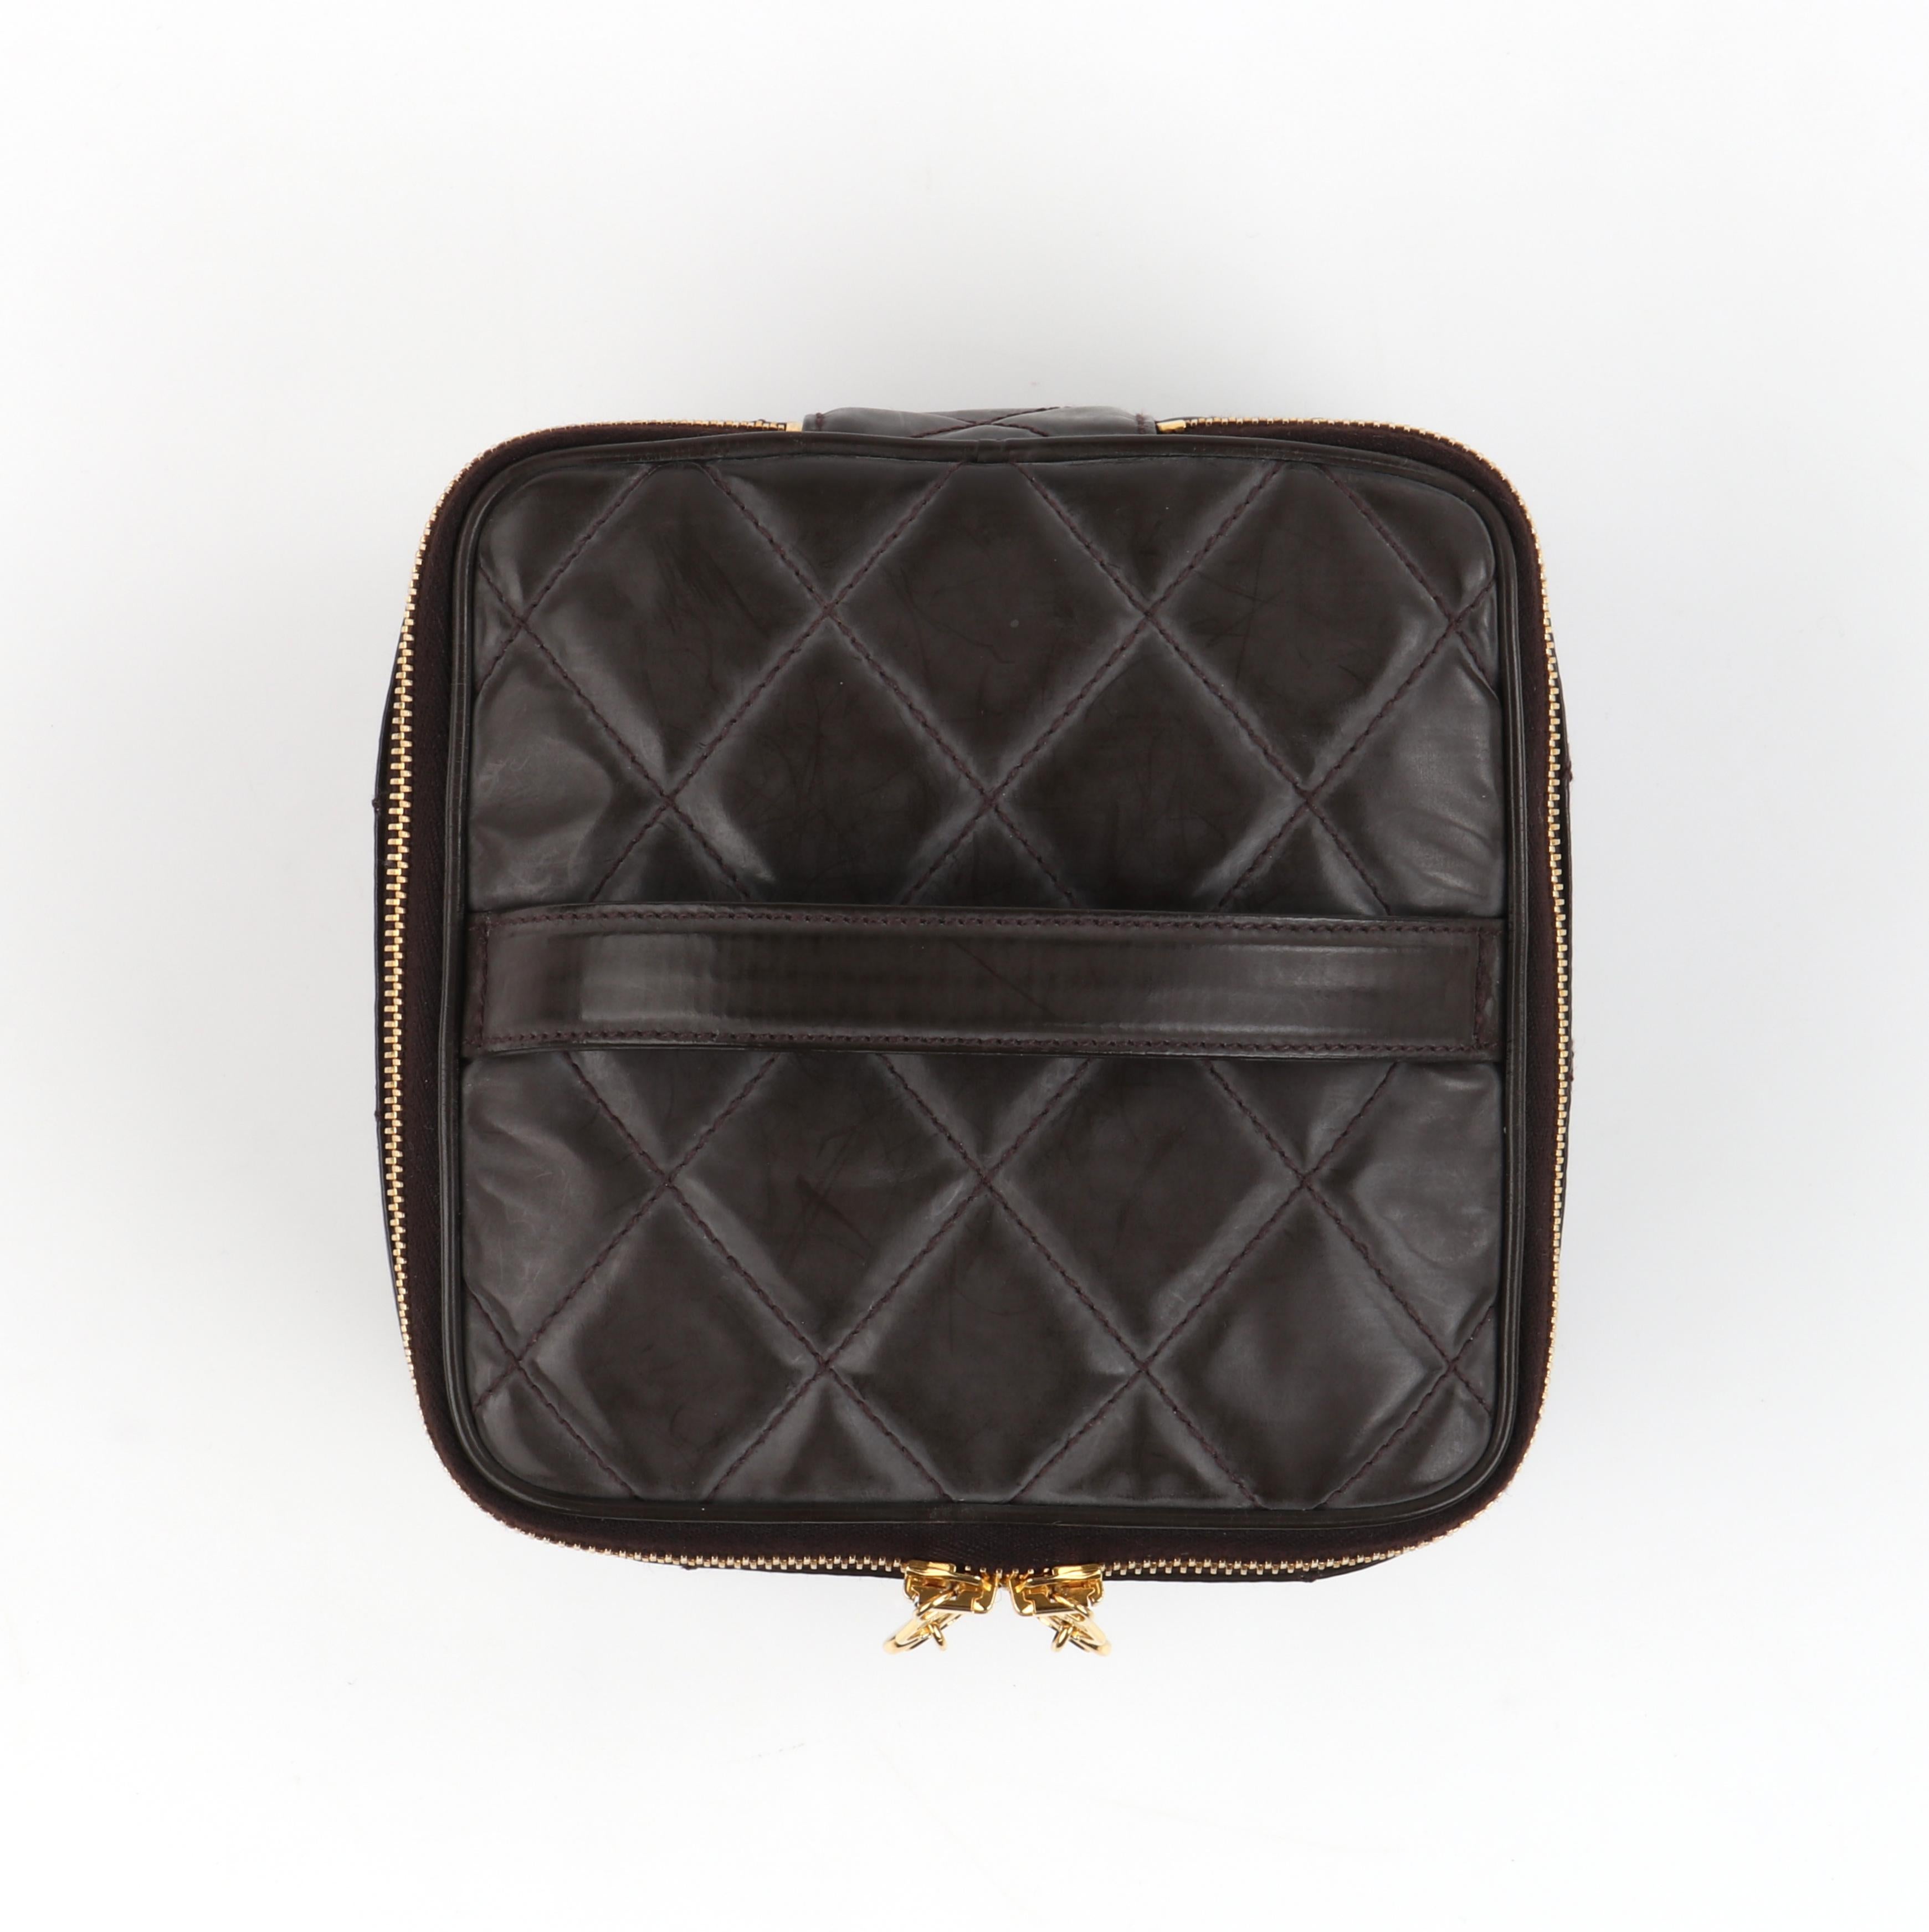 Black CHANEL c.1996 Brown Coated Leather Quilted Zip Around Cosmetic Bag Travel Case